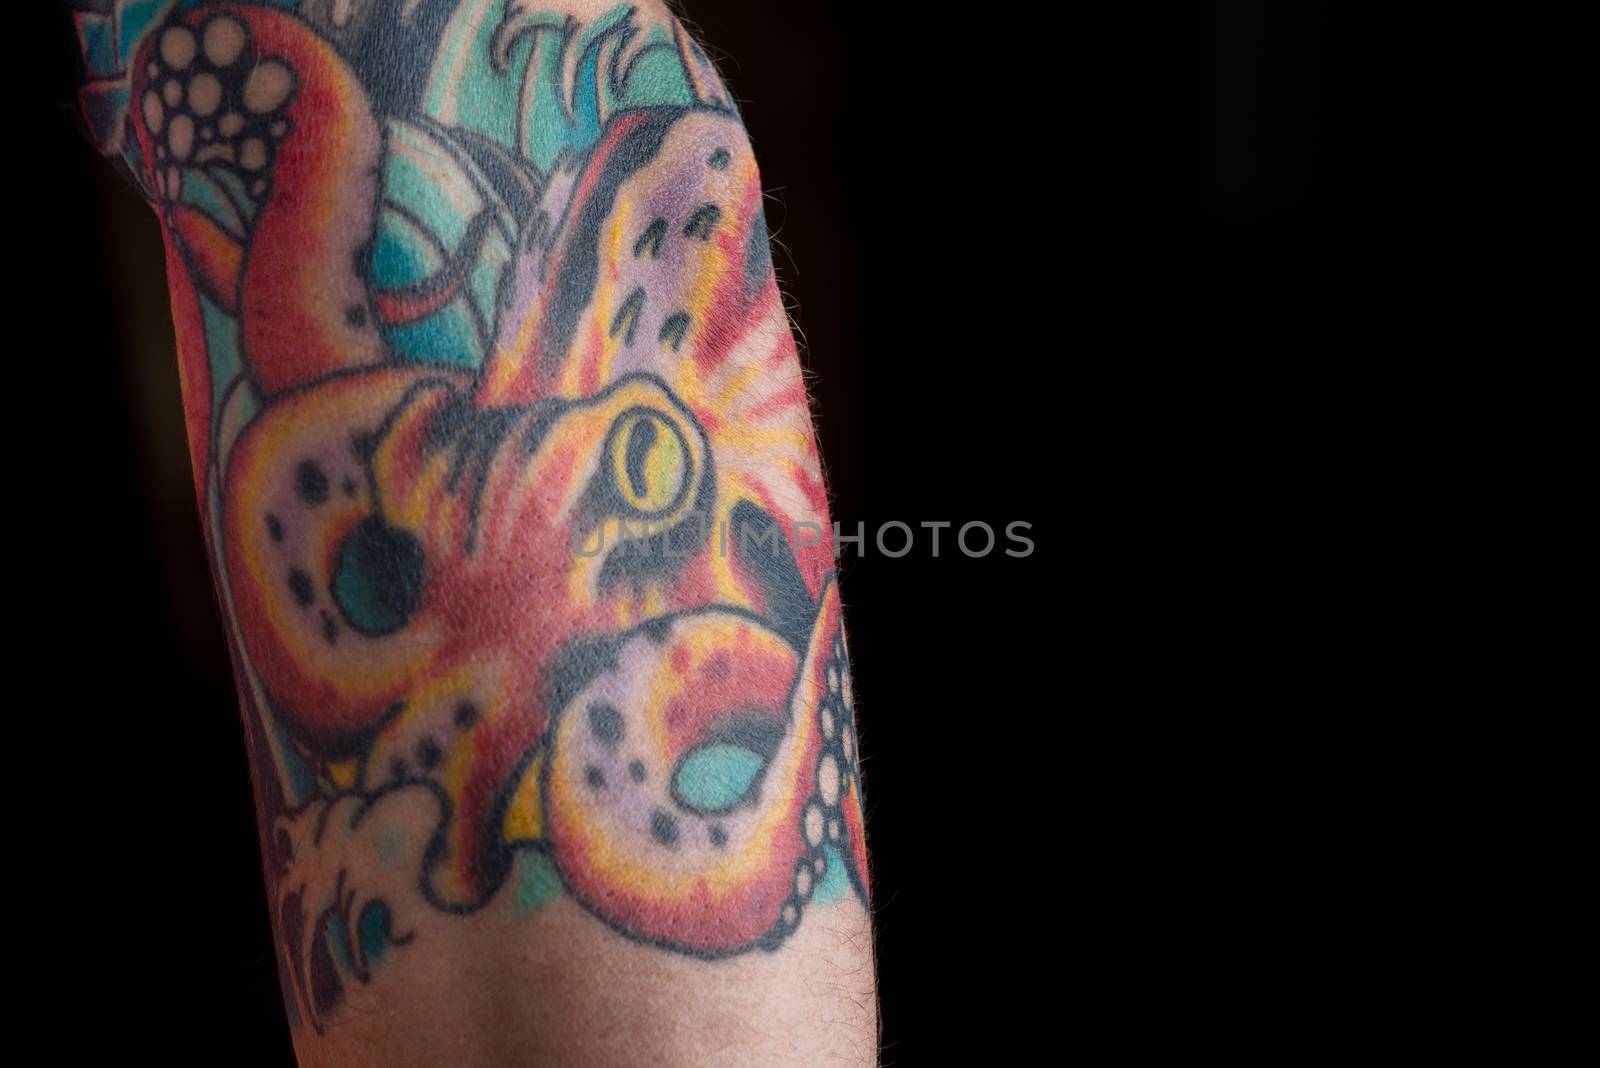 A tattoo of a red octopus on a black background.